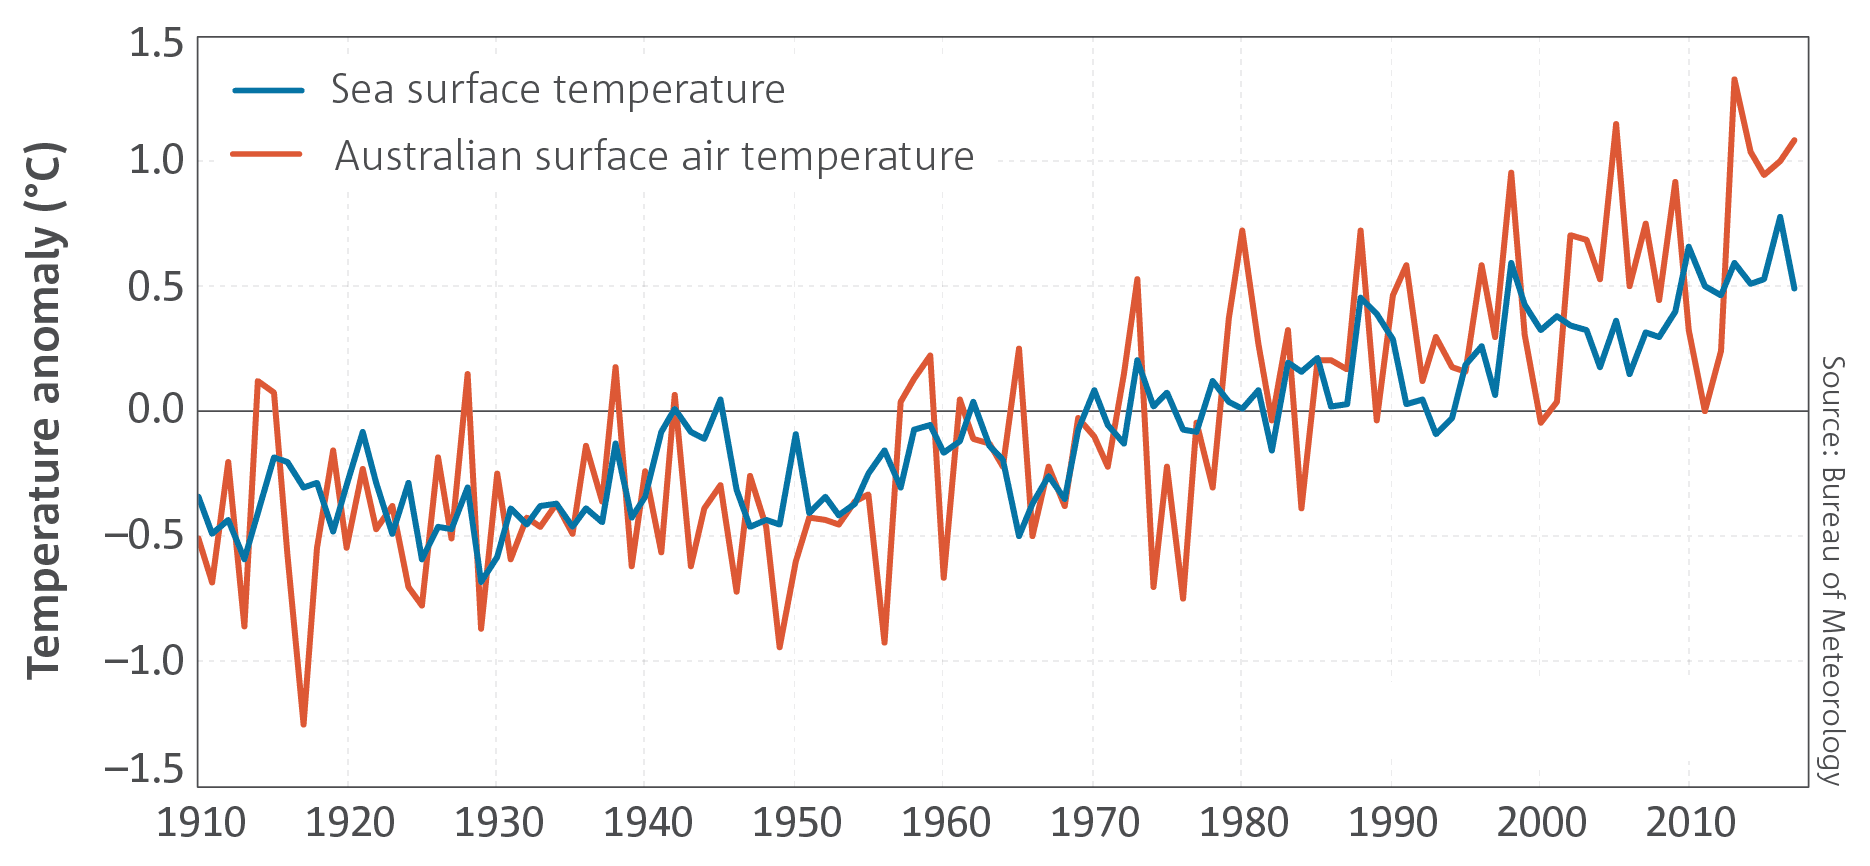 Credit: State of the Climate 2018, CSIRO and the Australian Bureau of Meteorology